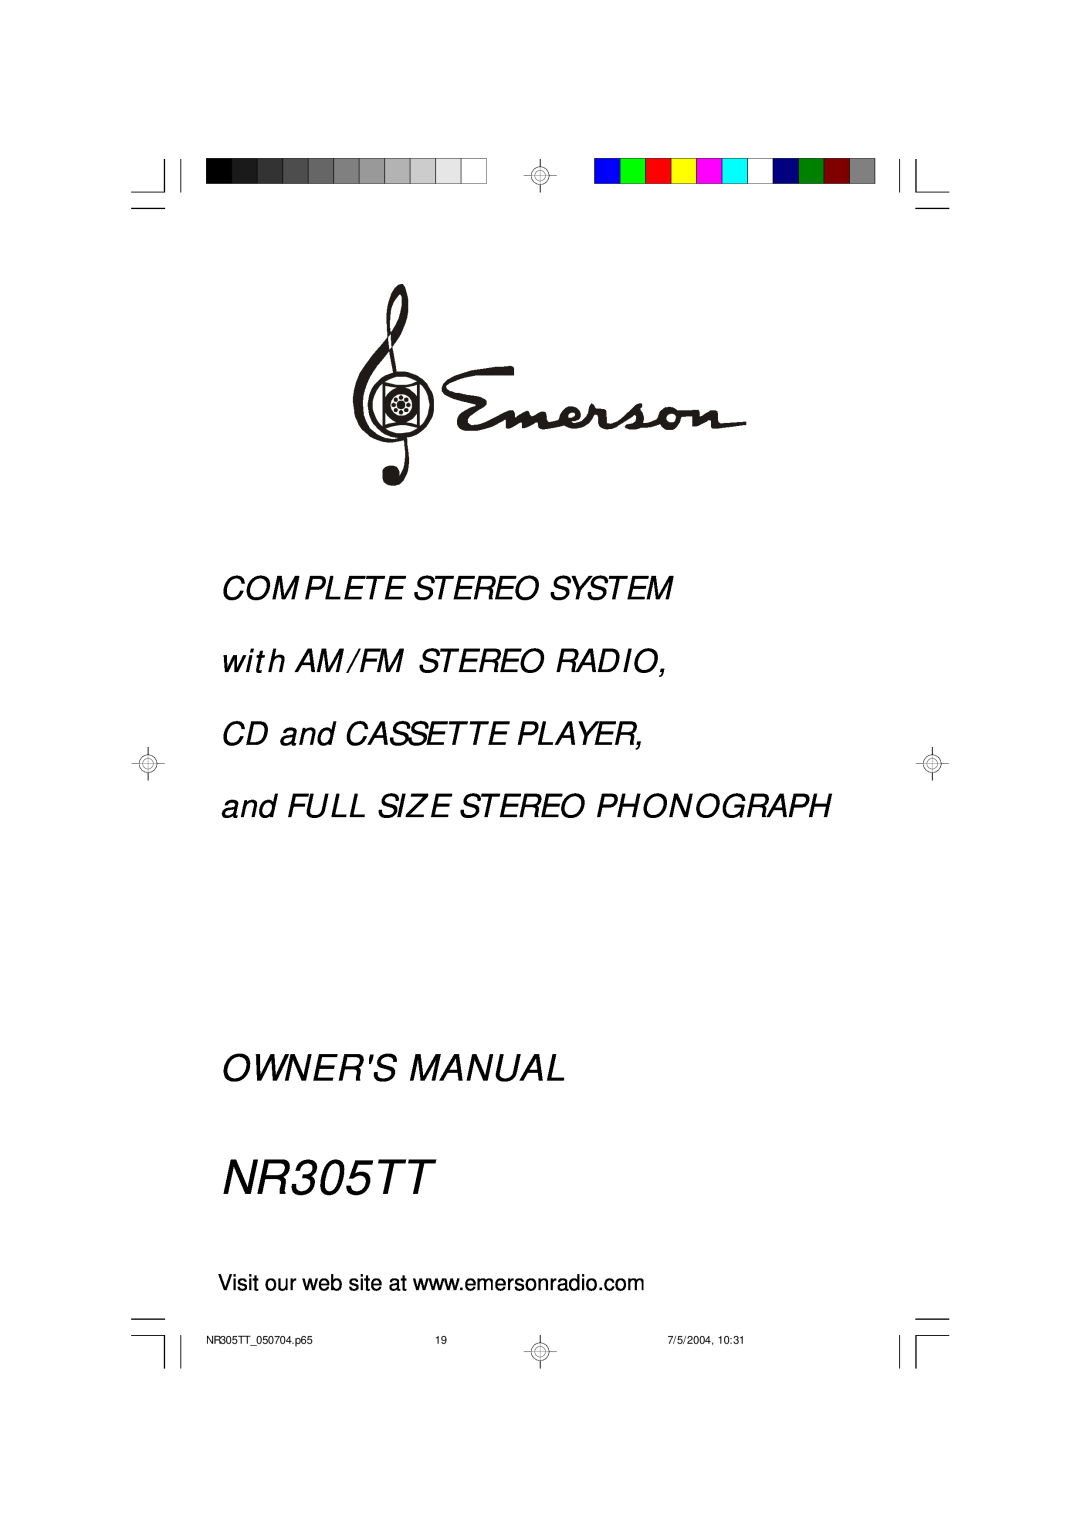 Emerson owner manual and FULL SIZE STEREO PHONOGRAPH, NR305TT 050704.p65, 7/5/2004 